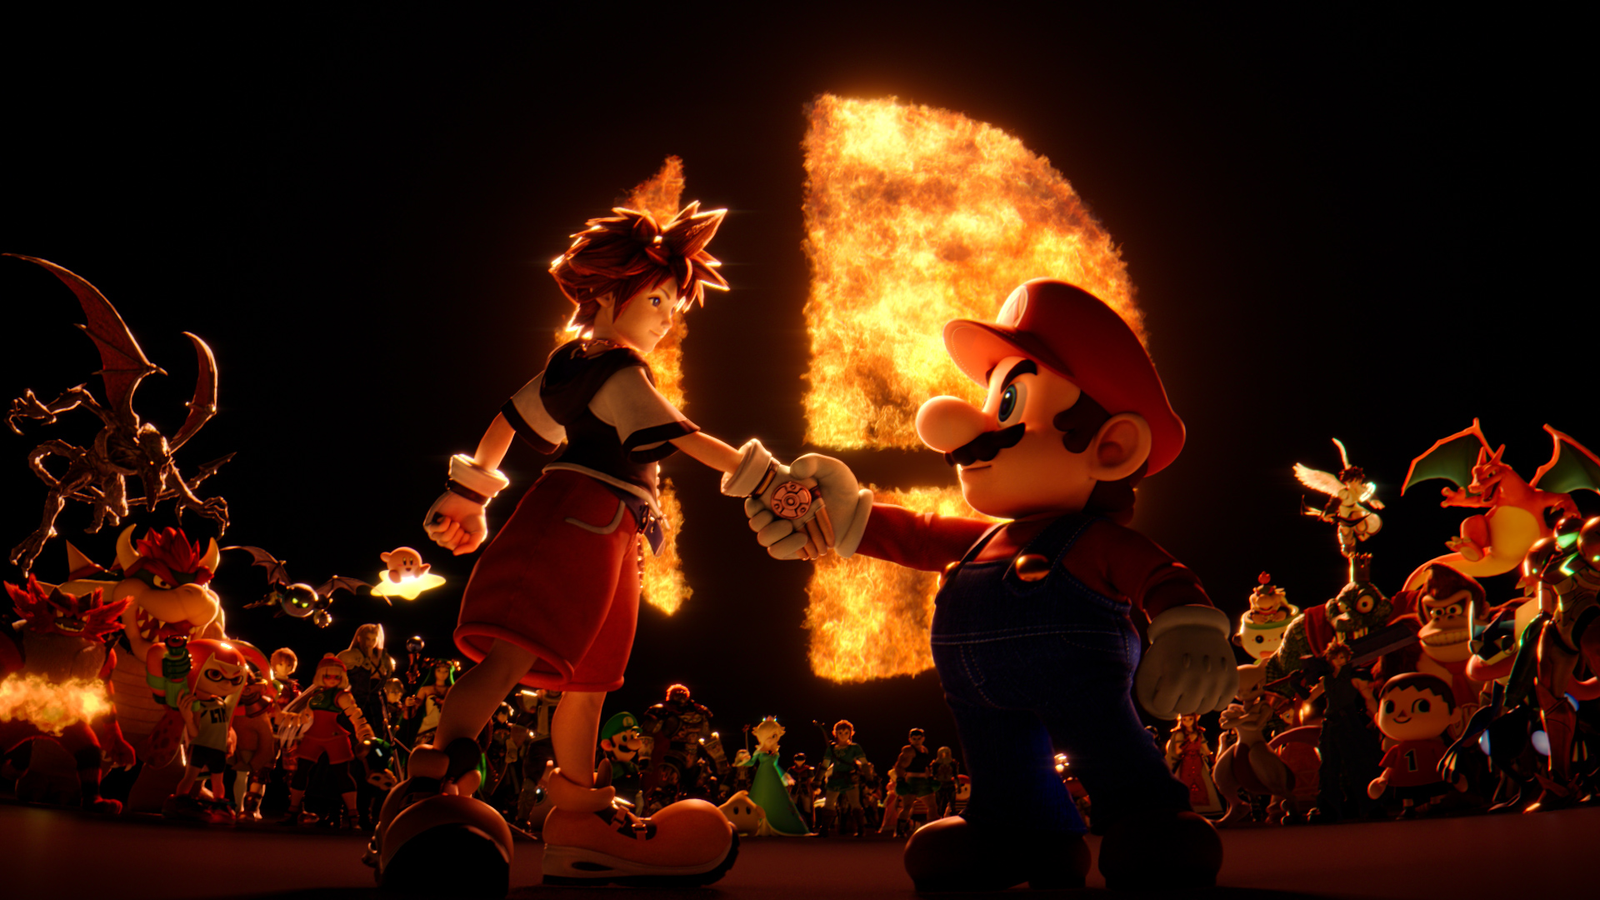 Super Smash Bros. creator can't really imagine a sequel without him